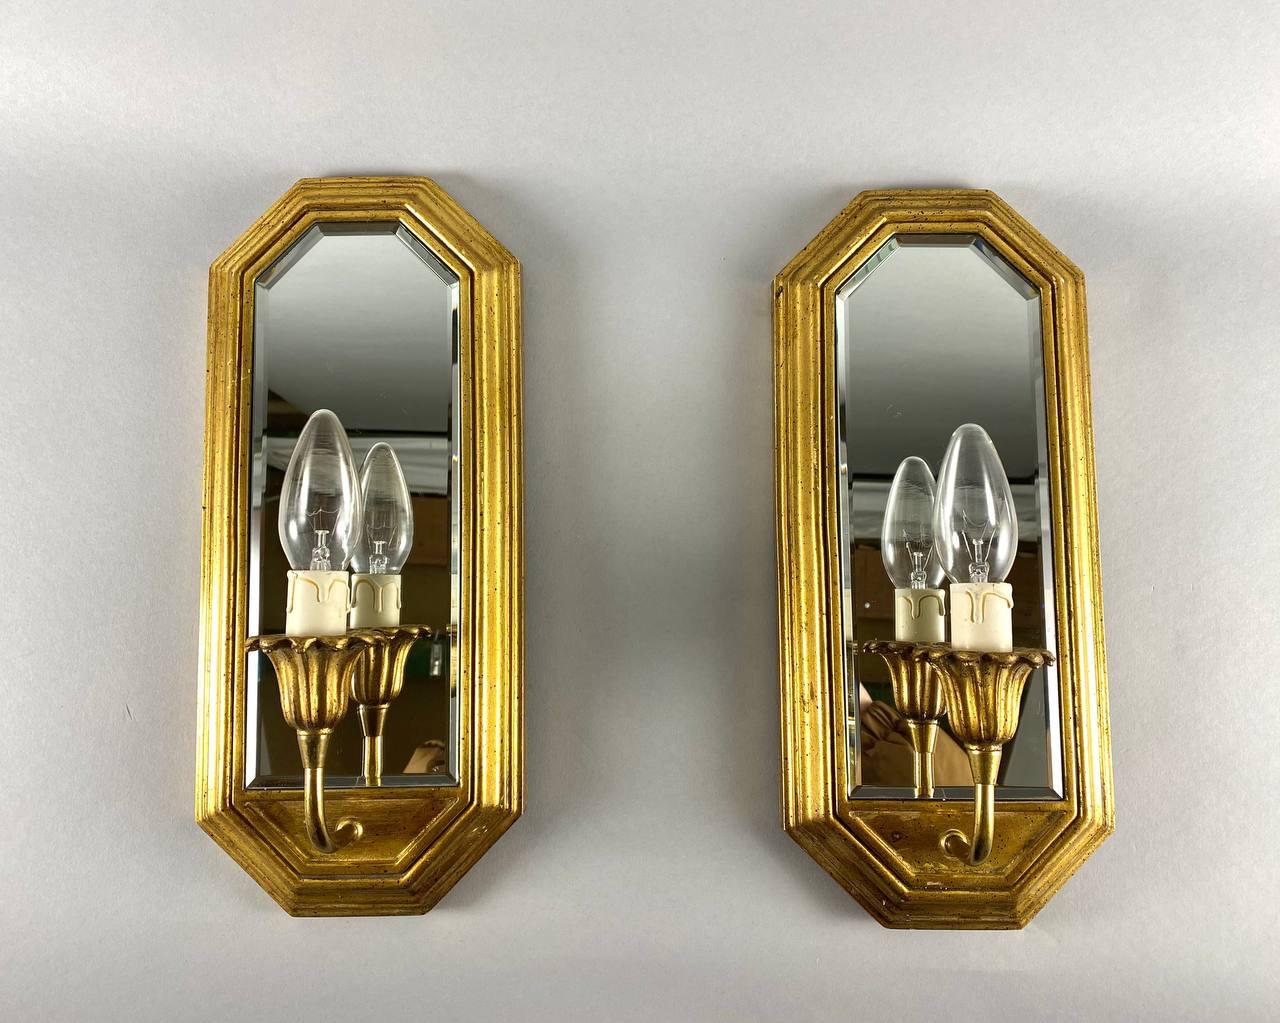 An Incredible set of 2 Wall Mirrors Sconces in gilded and polished brass and wood, created by the famous design house Deknudt, Belgium. 

 Dating from the second half of 20th century.

 The wall lamps are great for creating a cozy and soothing